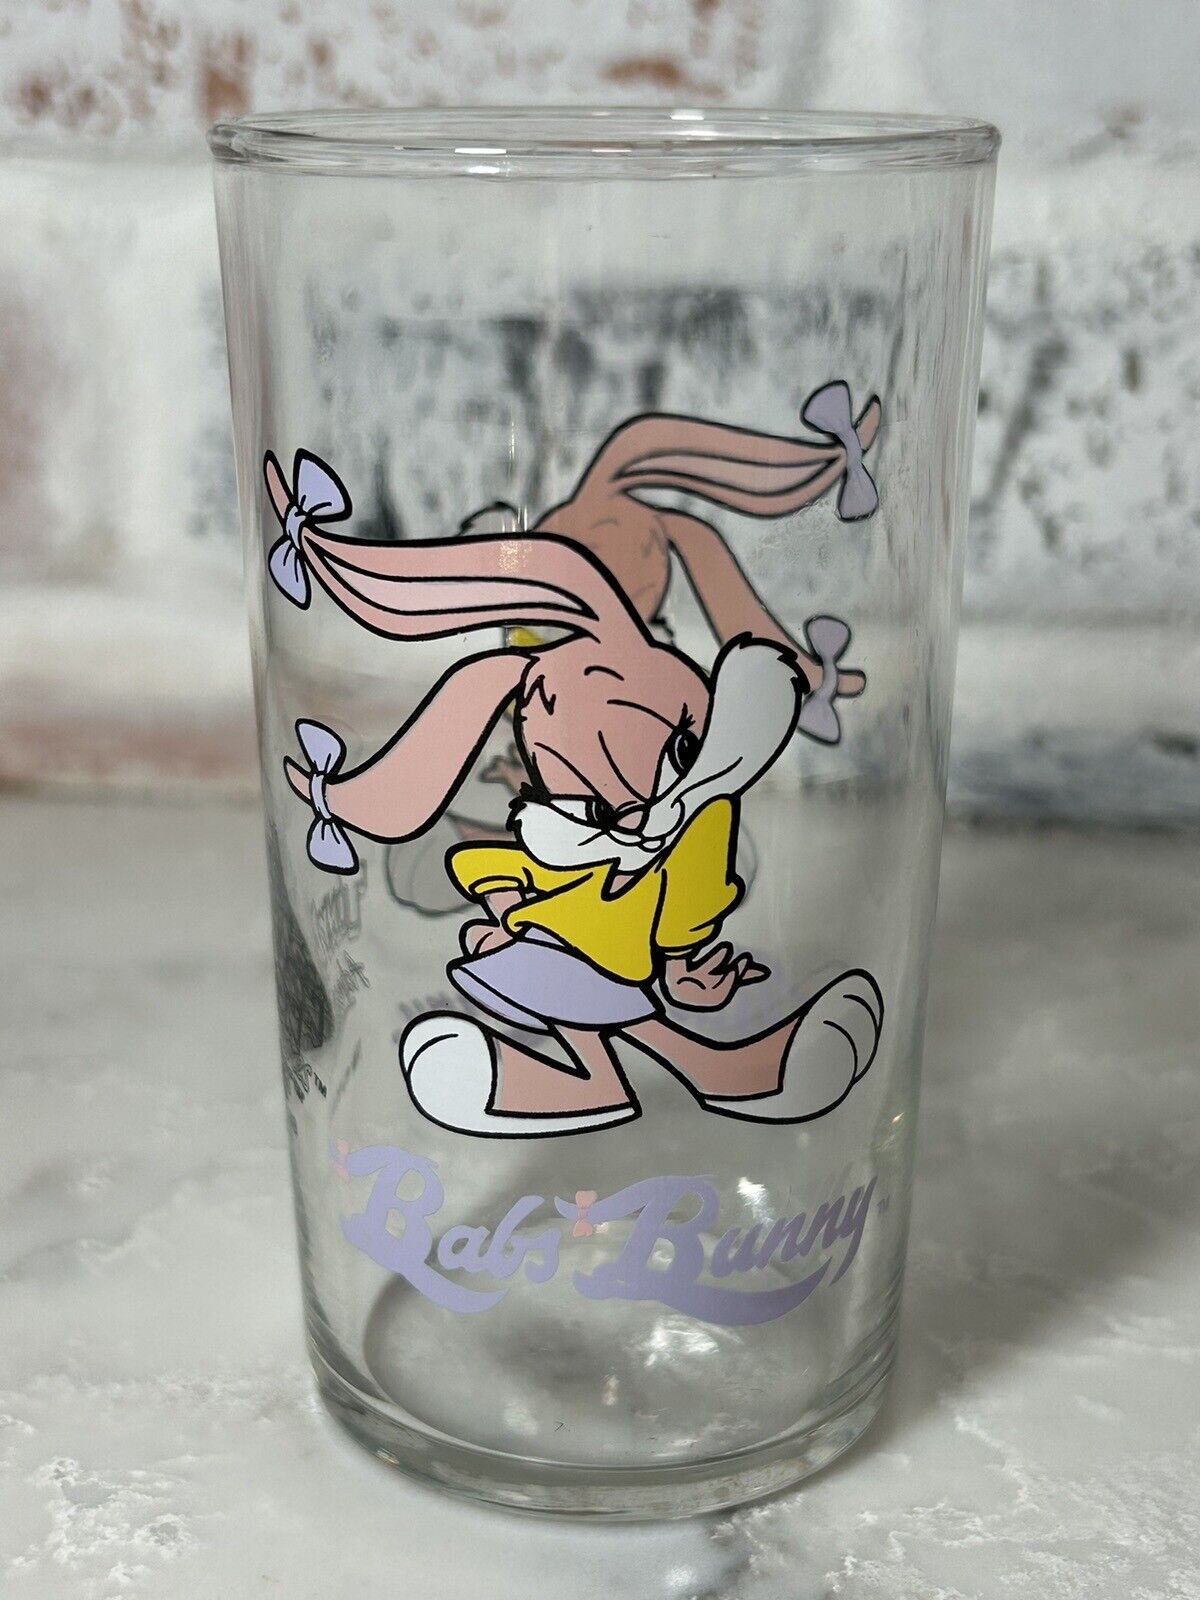 Rare Vintage 1993 “Tiny Toons Adventures” BABS BUNNY - 4” Juice Glass